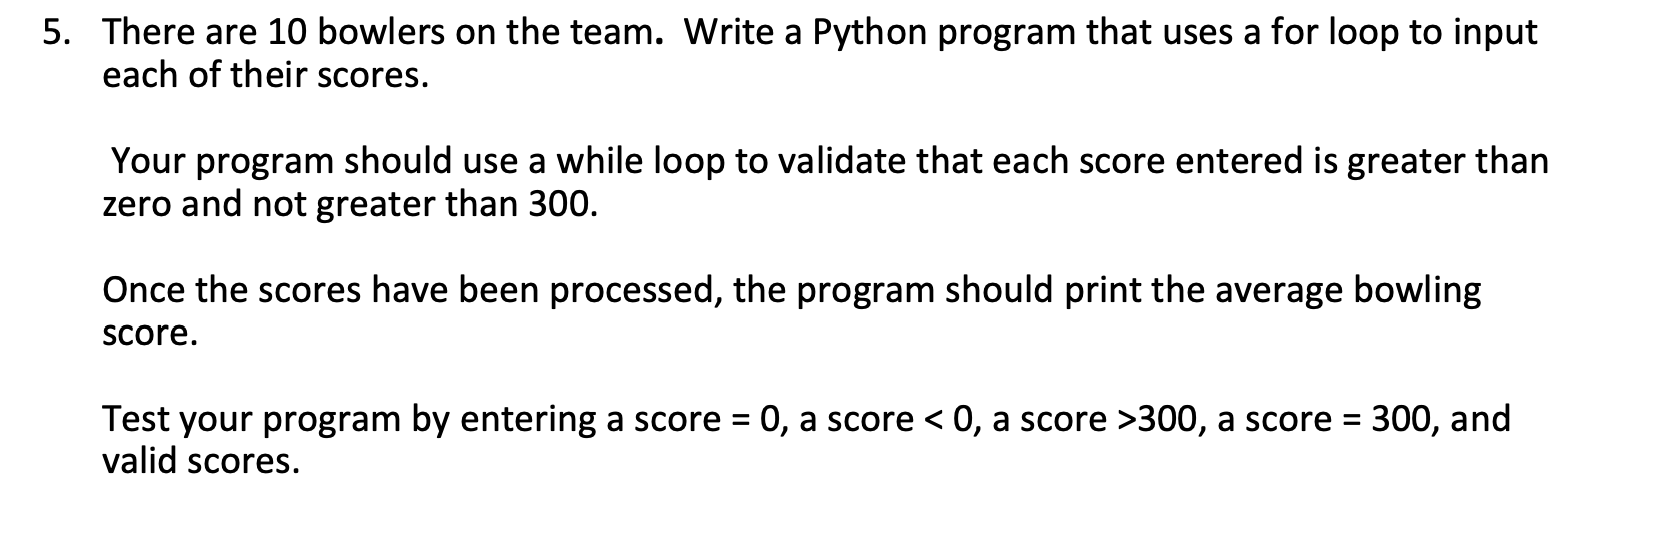 5. There are 10 bowlers on the team. Write a Python program that uses a for loop to input
each of their scores.
Your program should use a while loop to validate that each score entered is greater than
zero and not greater than 300.
Once the scores have been processed, the program should print the average bowling
Score.
Test your program by entering a score = 0, a score < 0, a score >300, a score = 300, and
valid scores.
%3D
%3D
